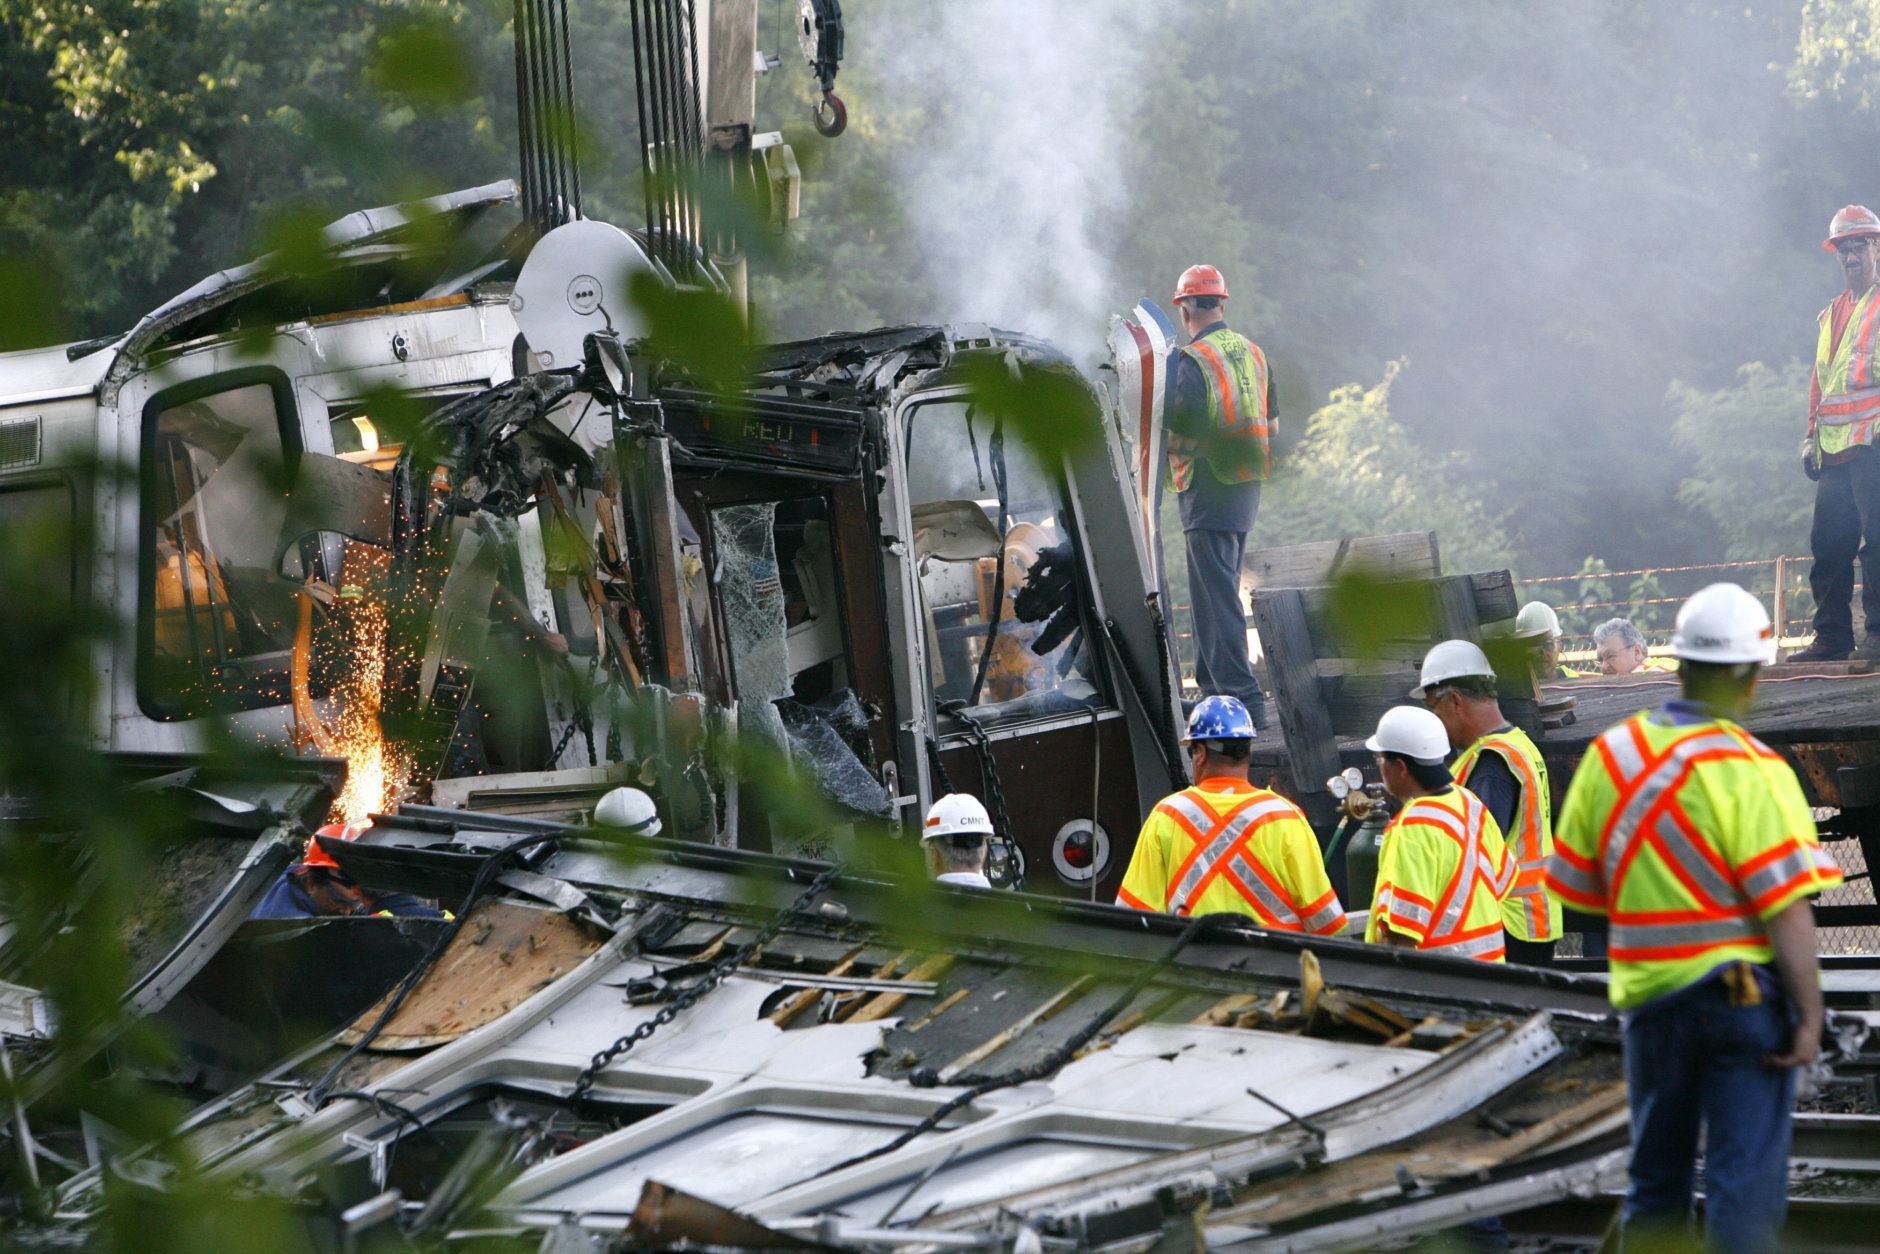 Officials continue to work around the scene of a rush-hour collision between two Metro transit trains in northeast Washington, D.C., Tuesday evening, June 23, 2009  (AP Photo/Jacquelyn Martin)